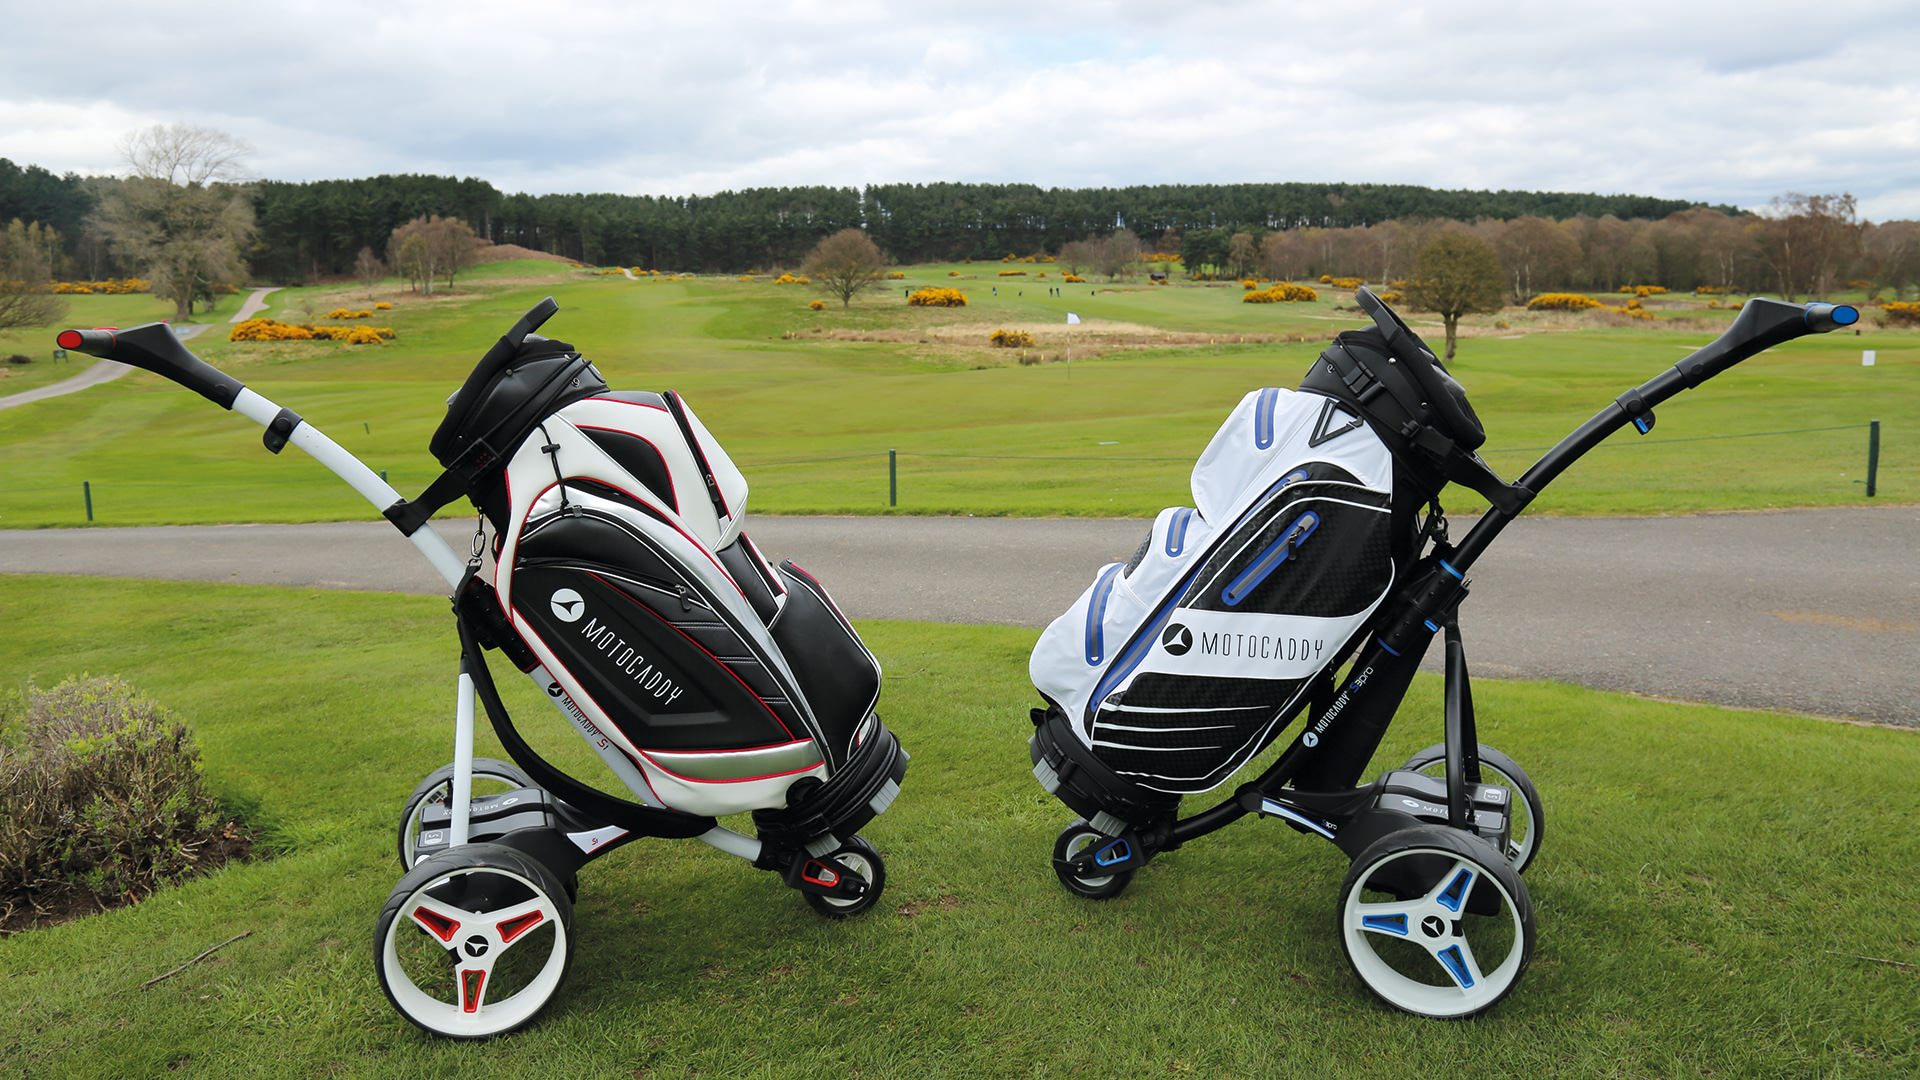 Do you need an electric golf trolley?